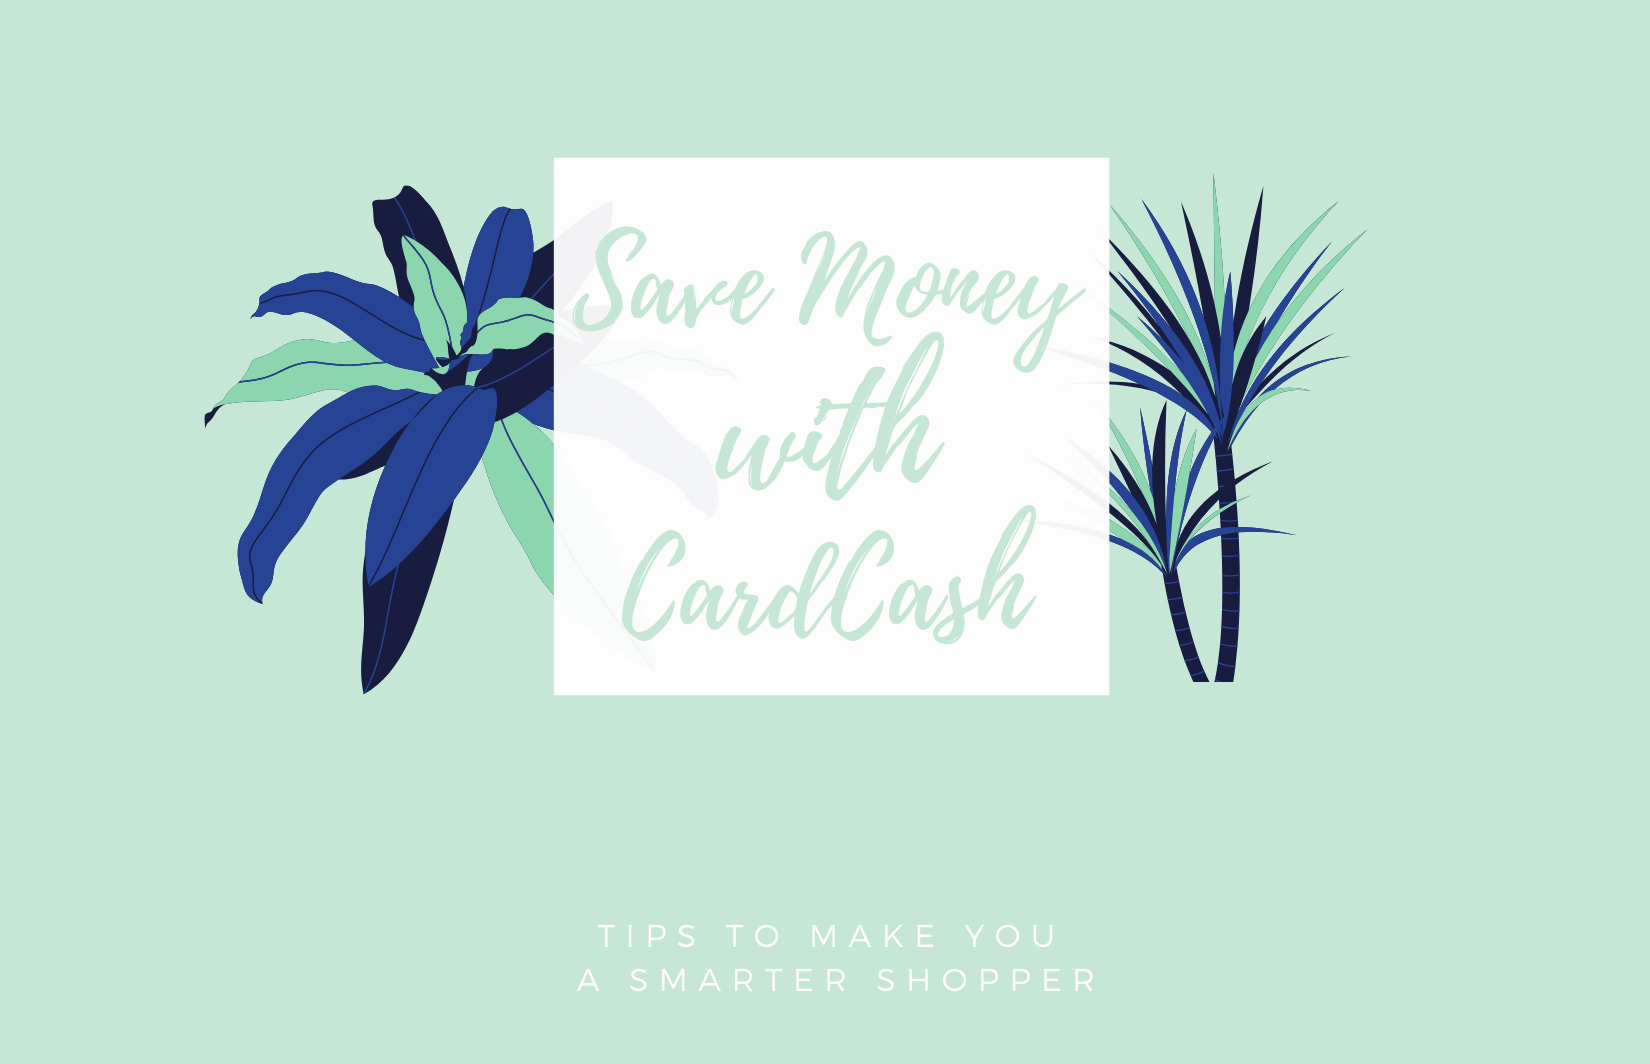 How To Save More With Cardcash Coupon Code June 2020 Super Easy